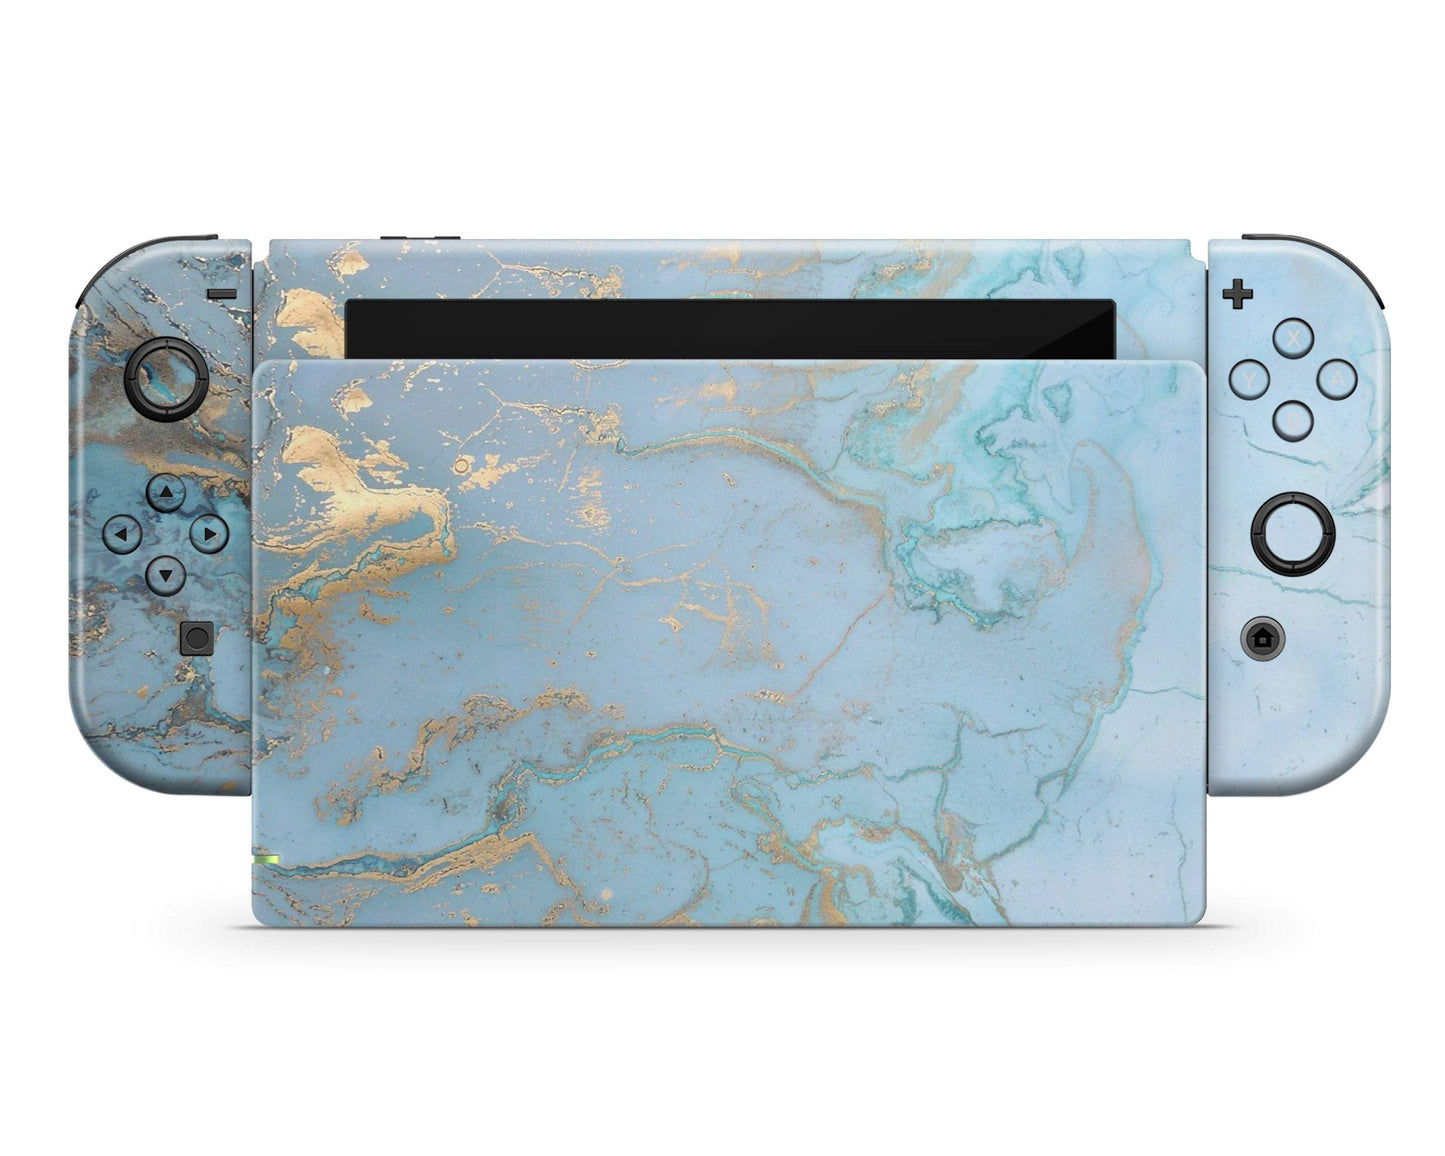 Lux Skins Nintendo Switch Blue Marble Classic no logo Skins - Pattern Marble Skin